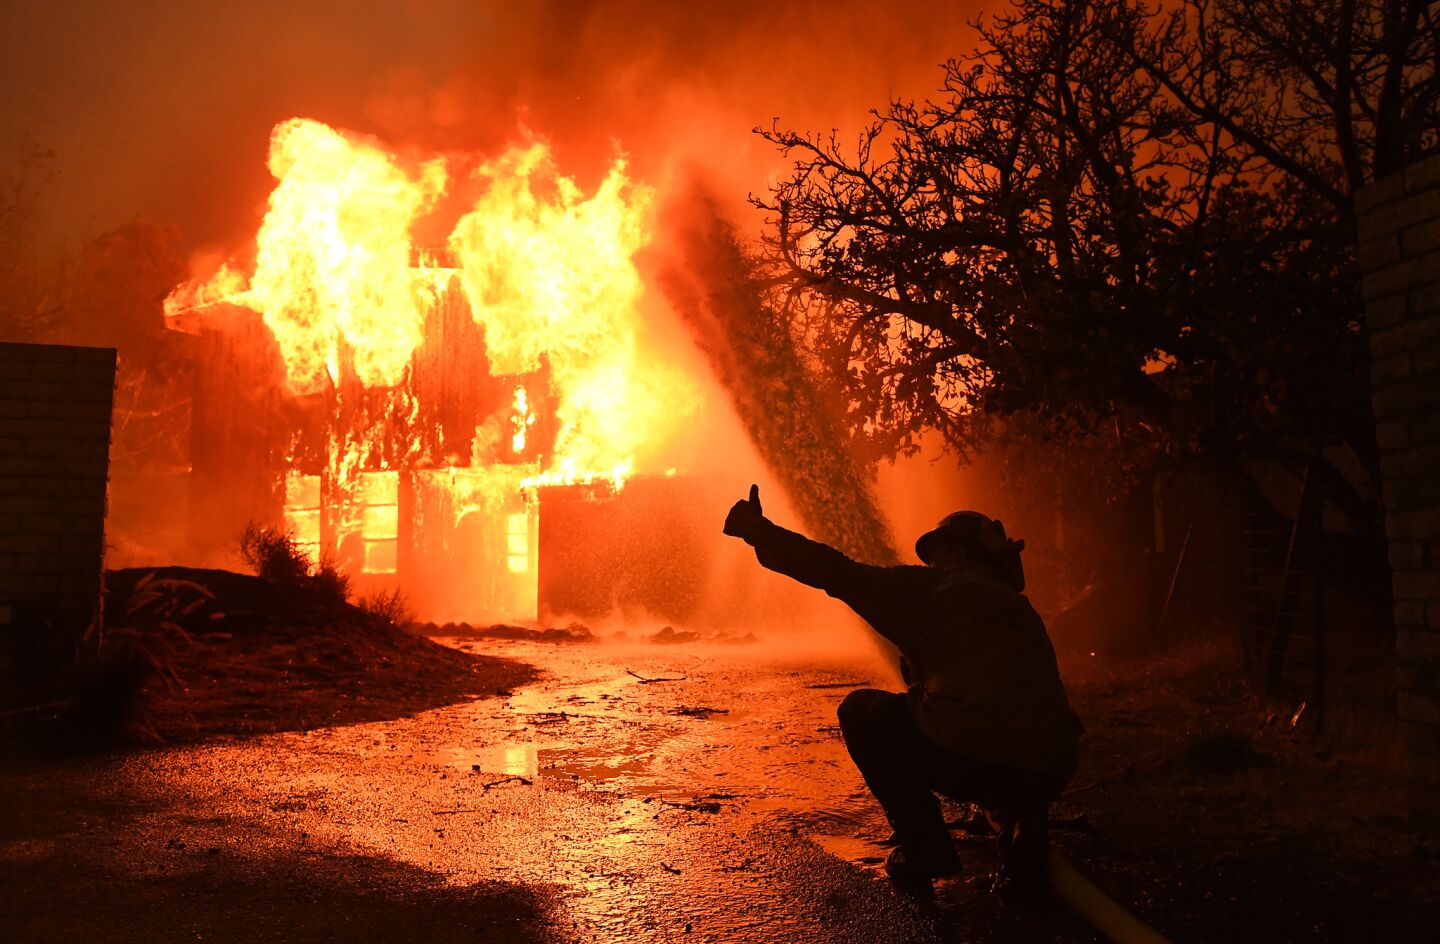 A firefighter requests more water pressure as a house burns from the Woolsey Fire along P.C.H. in Malibu.